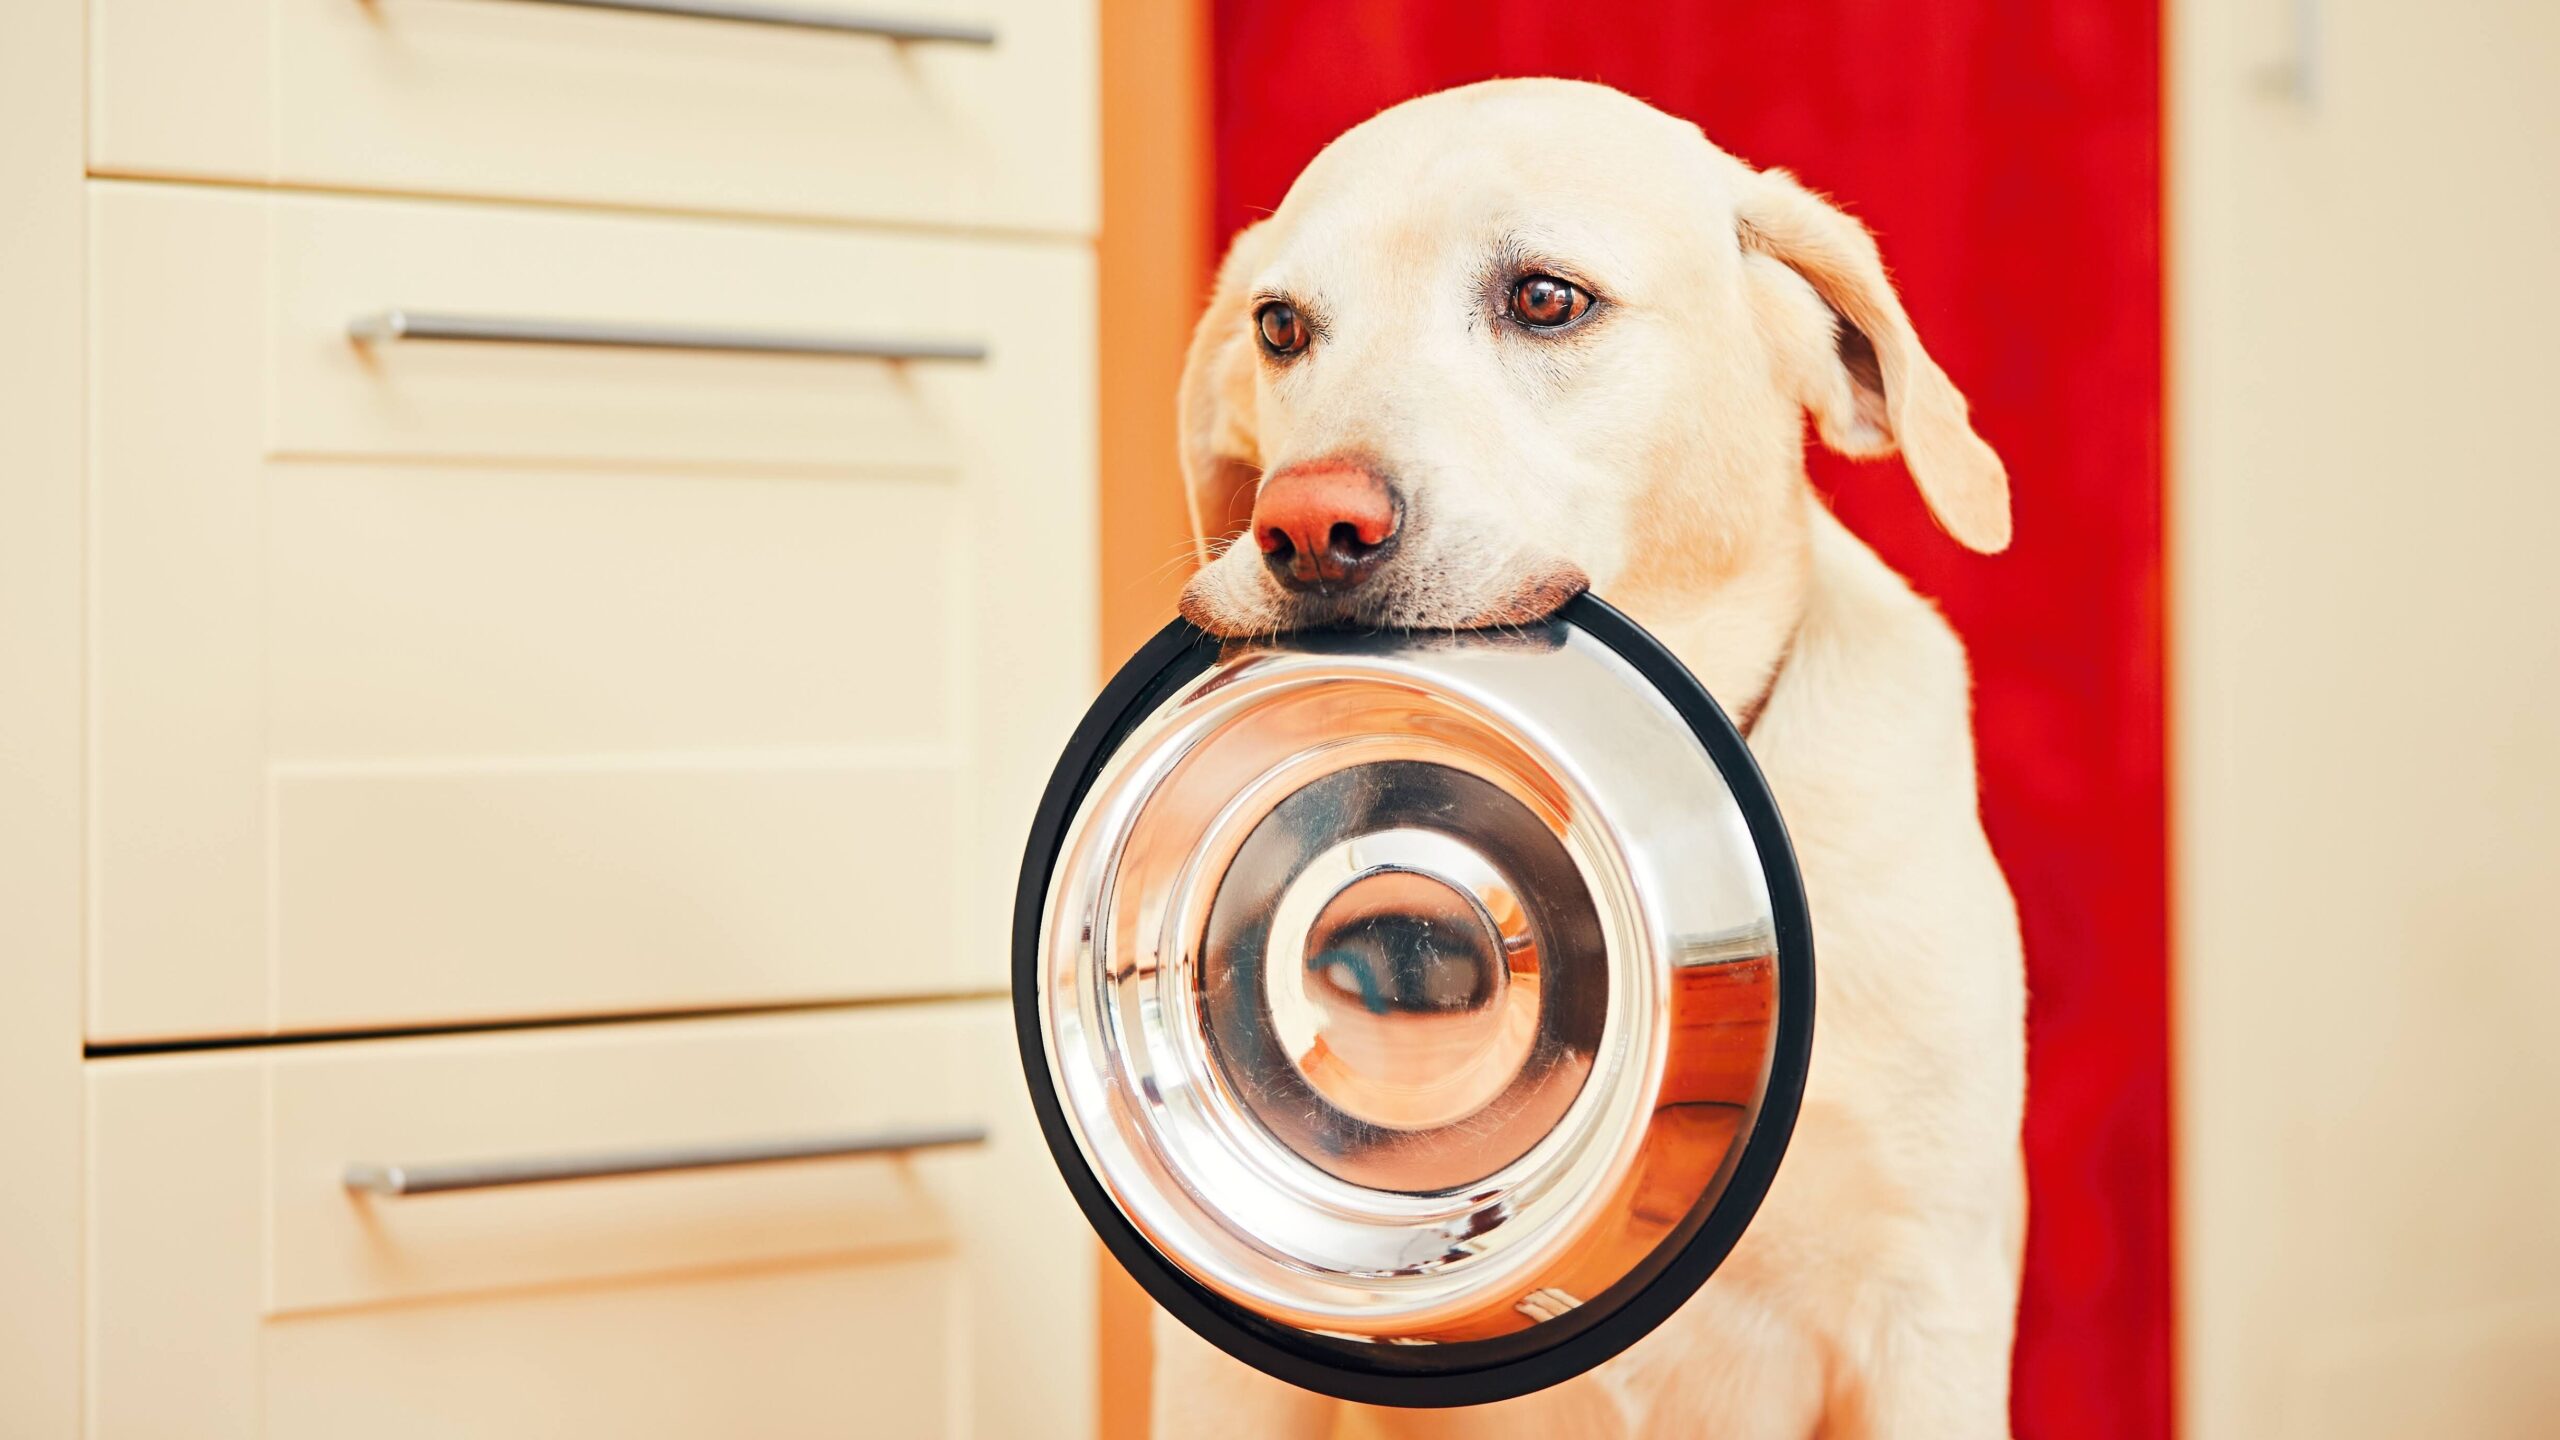 Domestic life with dog. Hungry dog with sad eyes is waiting for feeding in home kitchen. Adorable yellow labrador retriever is holding dog bowl in his mouth.